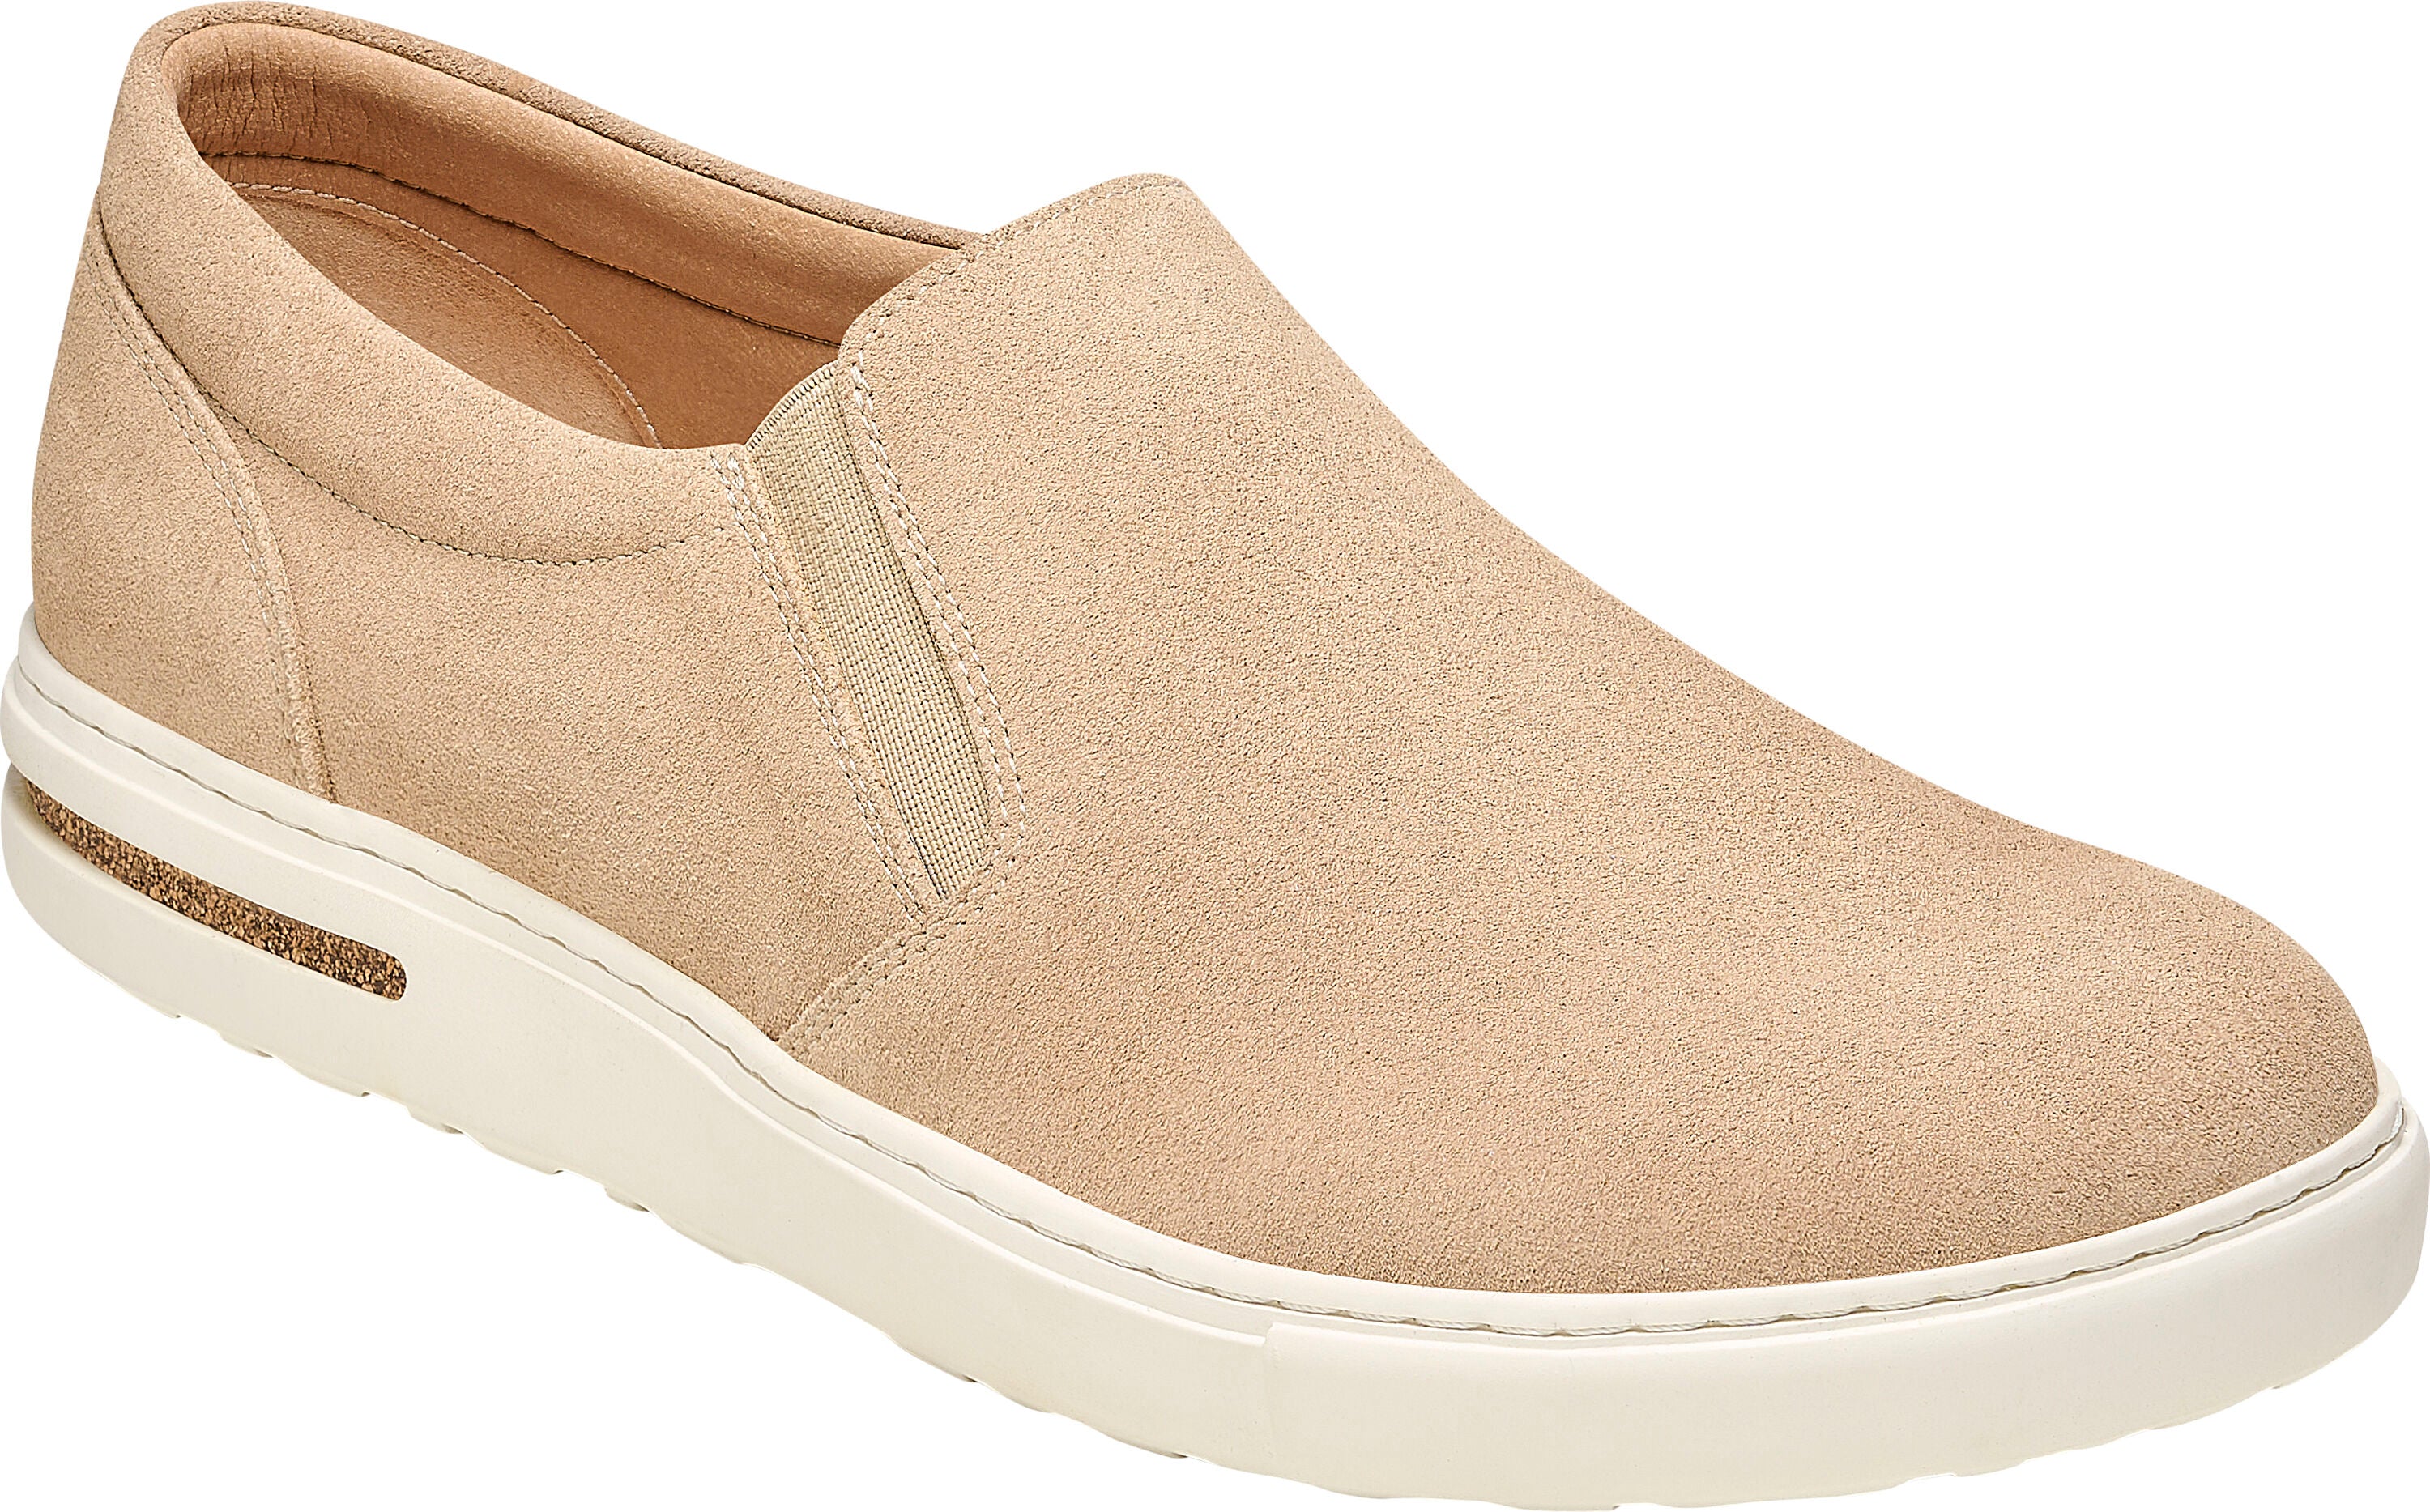 Birkenstock Limited Edition Oswego sandcastle suede with white sole